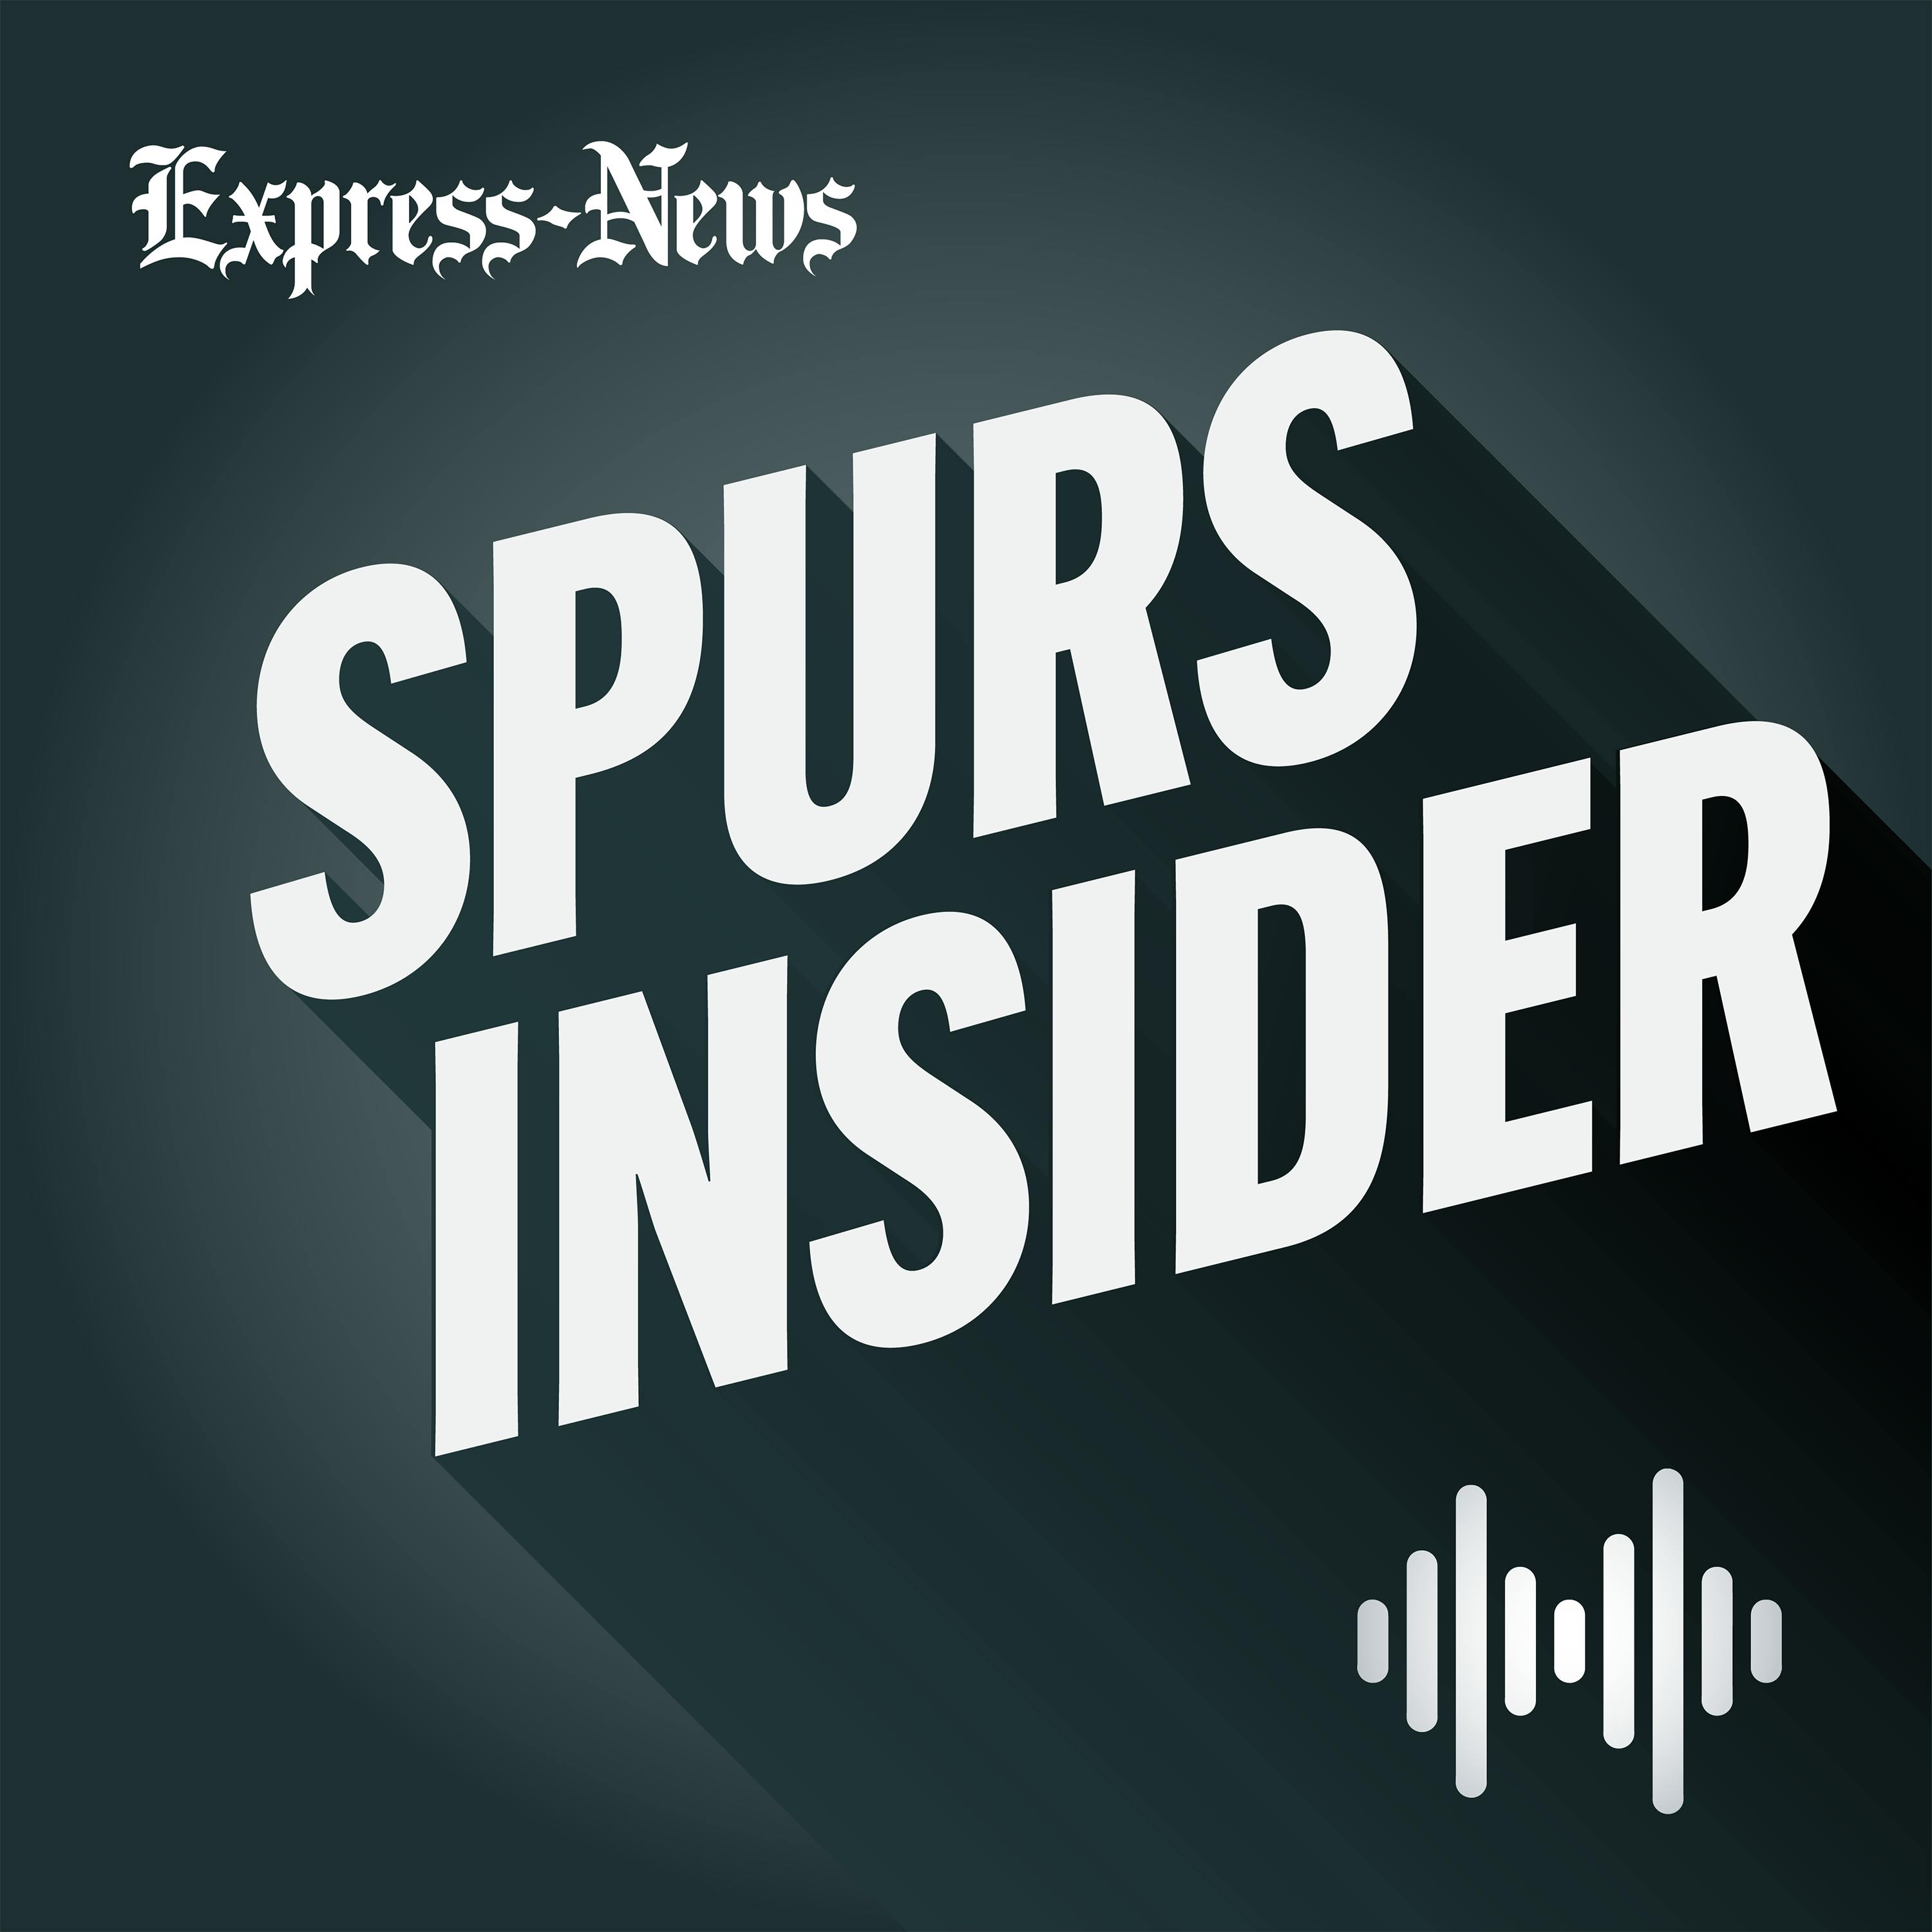 Episode 87: How will success be measured for the Spurs in the 2021 season?